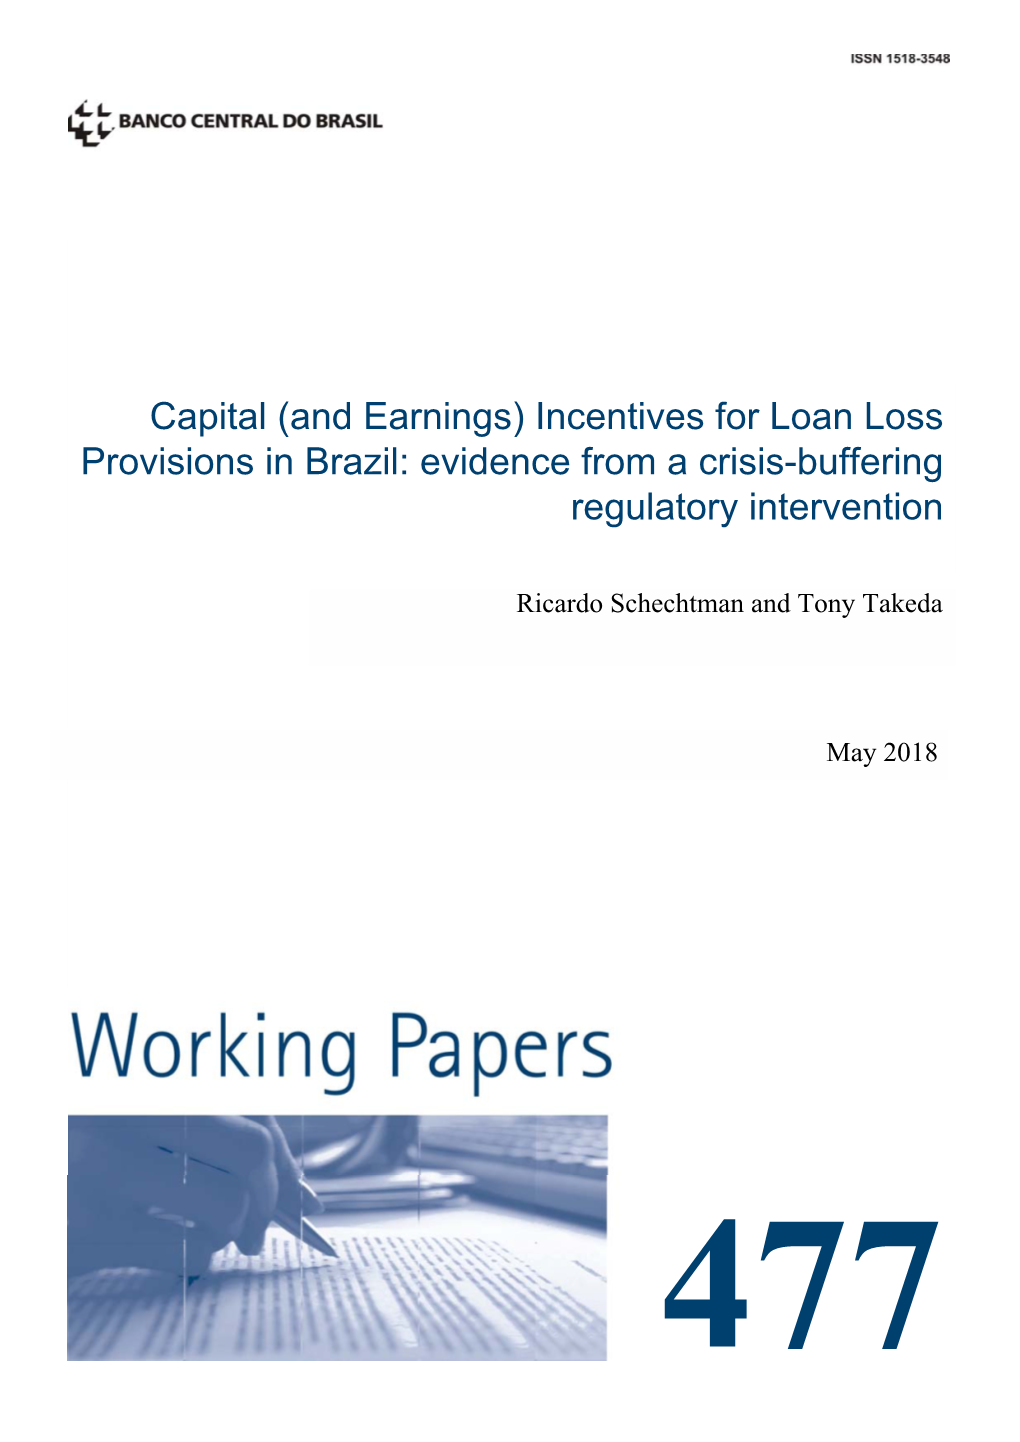 Capital (And Earnings) Incentives for Loan Loss Provisions in Brazil: Evidence from a Crisis-Buffering Regulatory Intervention